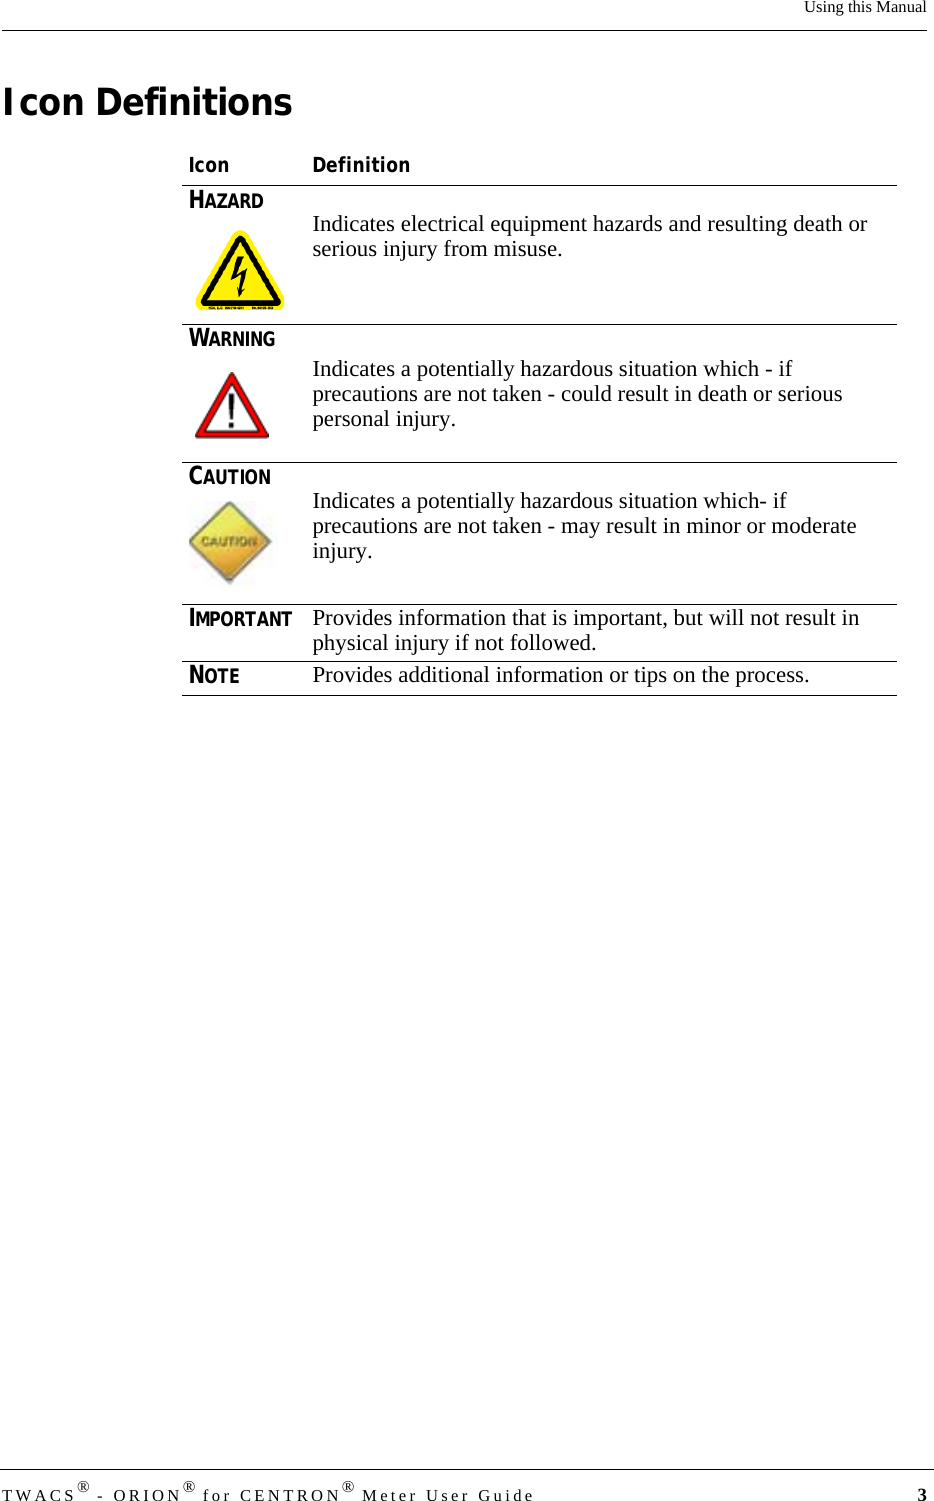 TWACS® - ORION® for CENTRON® Meter User Guide 3Using this ManualIcon DefinitionsIcon DefinitionHAZARDIndicates electrical equipment hazards and resulting death or serious injury from misuse.WARNINGIndicates a potentially hazardous situation which - if precautions are not taken - could result in death or serious personal injury.CAUTIONIndicates a potentially hazardous situation which- if precautions are not taken - may result in minor or moderate injury.IMPORTANTProvides information that is important, but will not result in physical injury if not followed.NOTEProvides additional information or tips on the process.